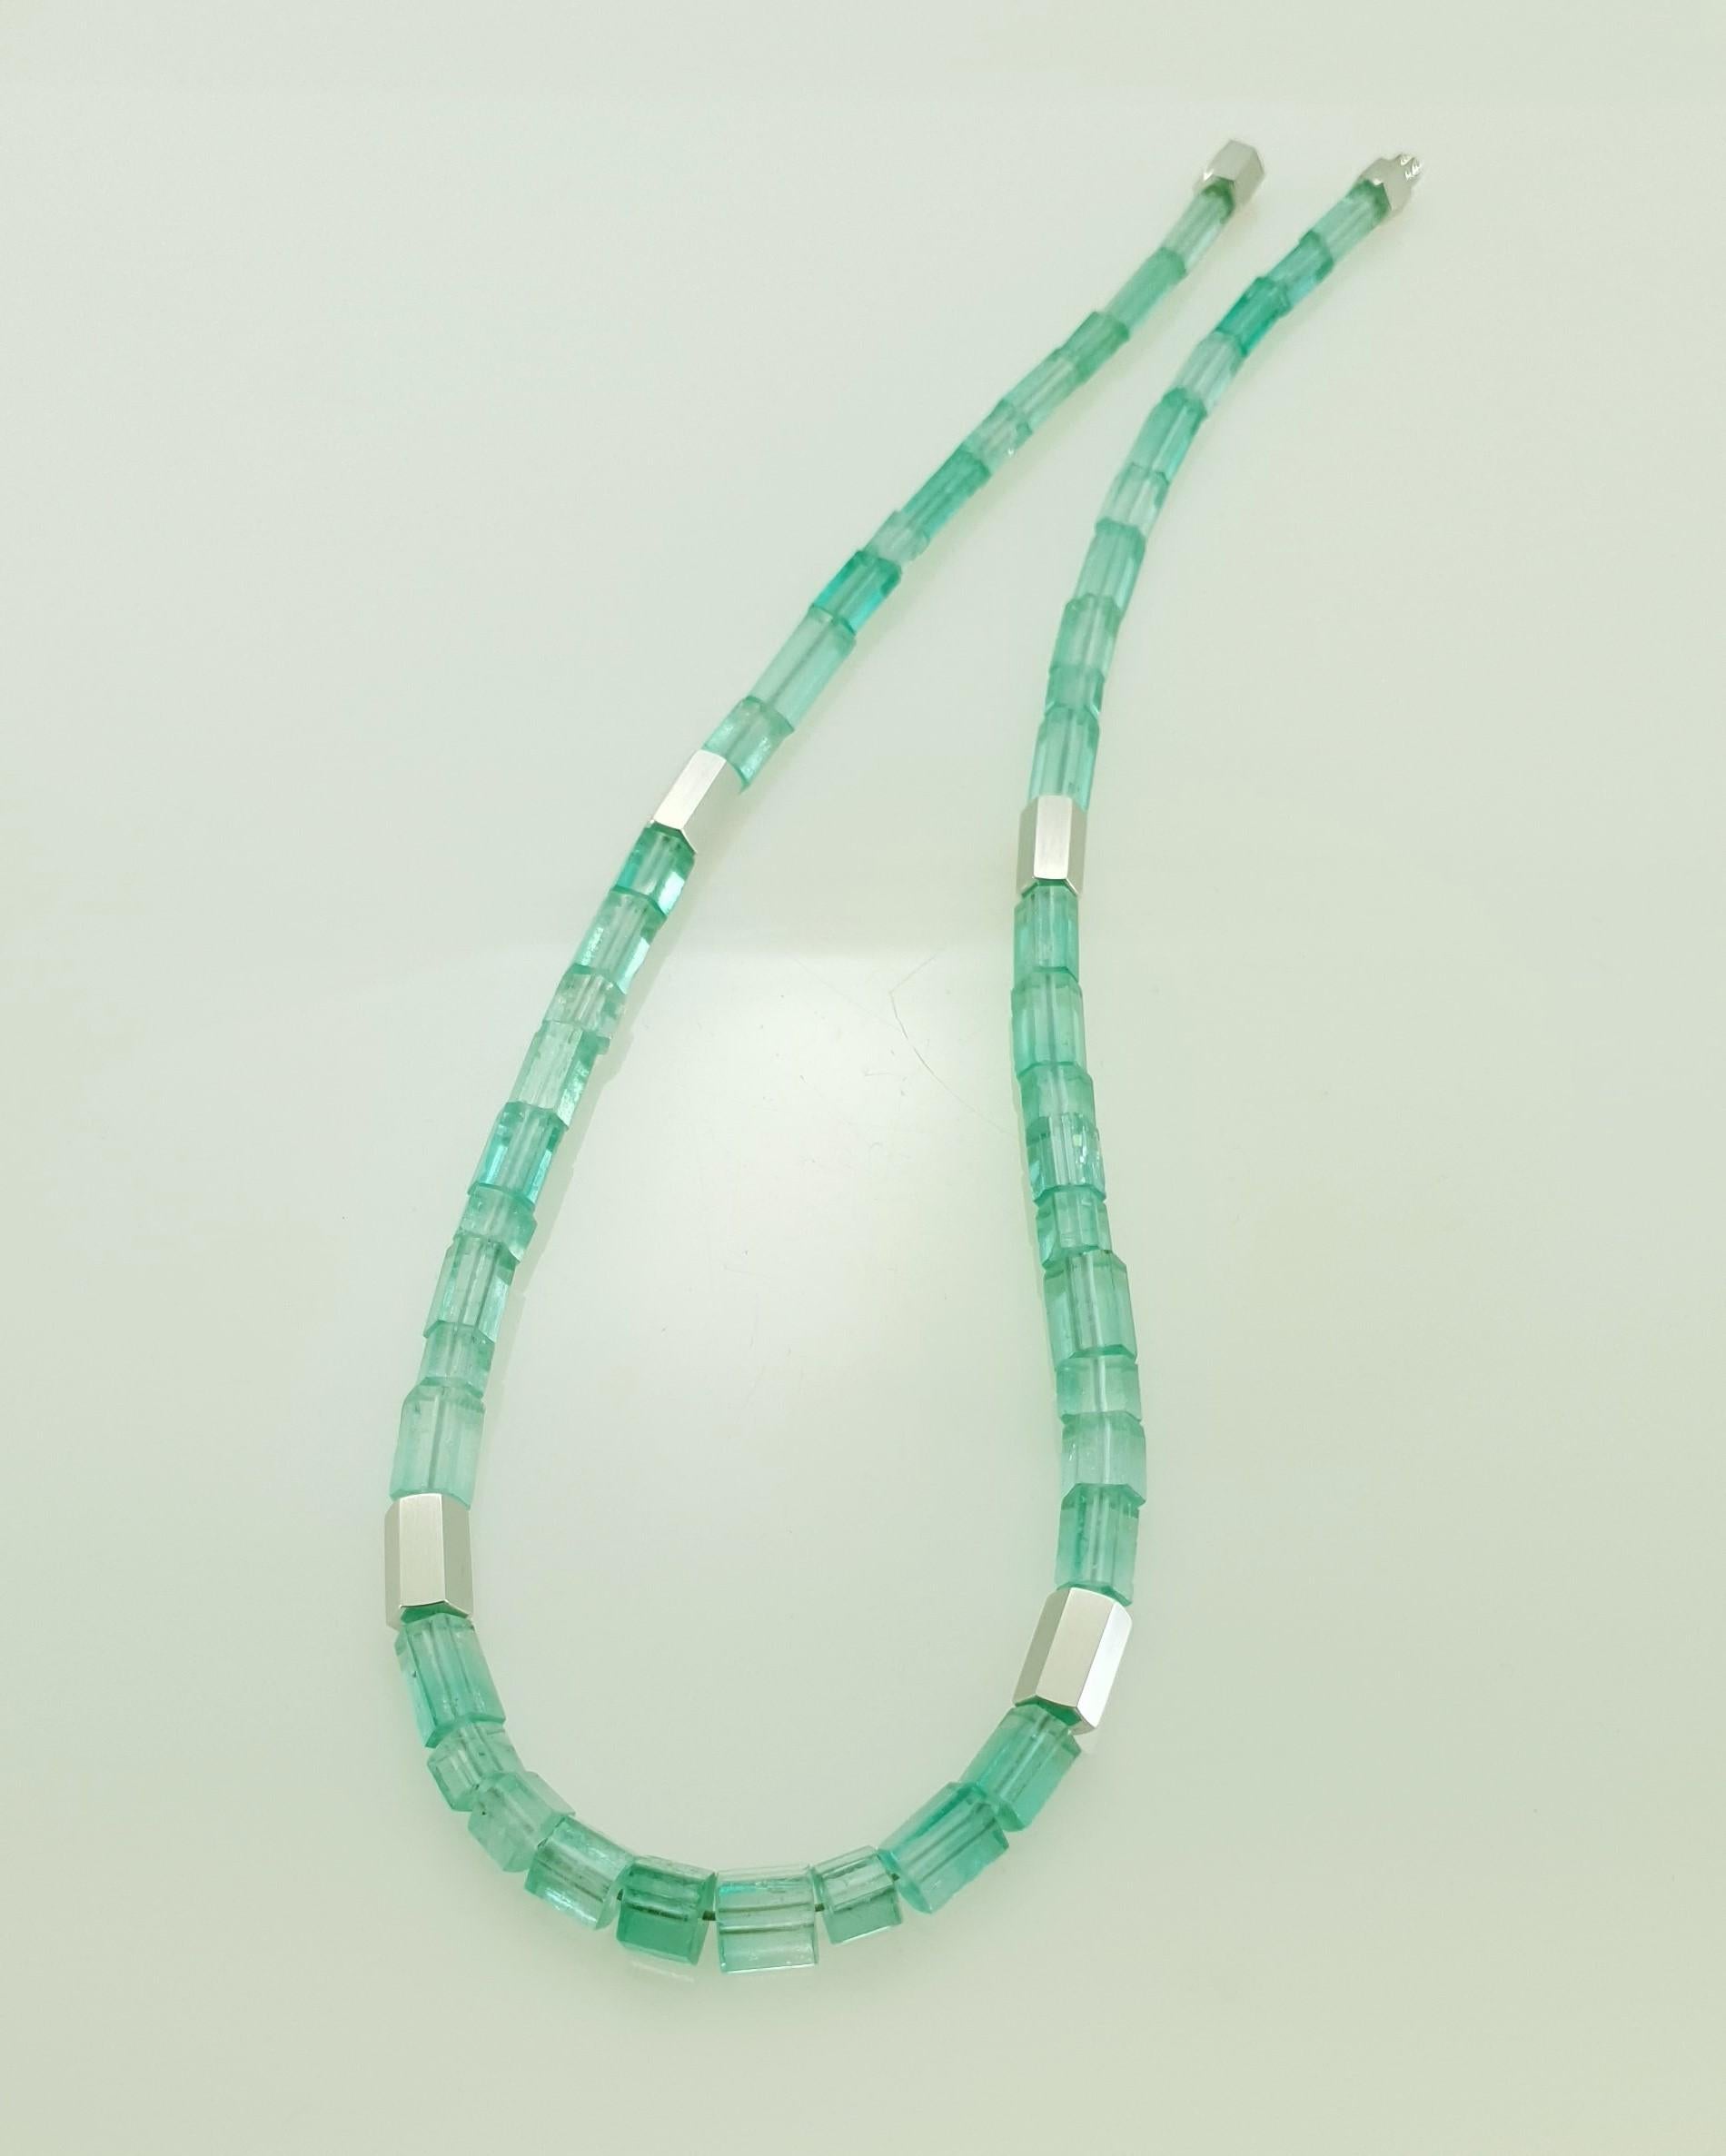 This pastel green Beryl Crystal Beaded Necklace with 18 Carat Mat white Gold is totally handmade. Cutting as well as goldwork are made in German quality. The screw clasp is easy to handle and very secure. The crystals surface is completly natural